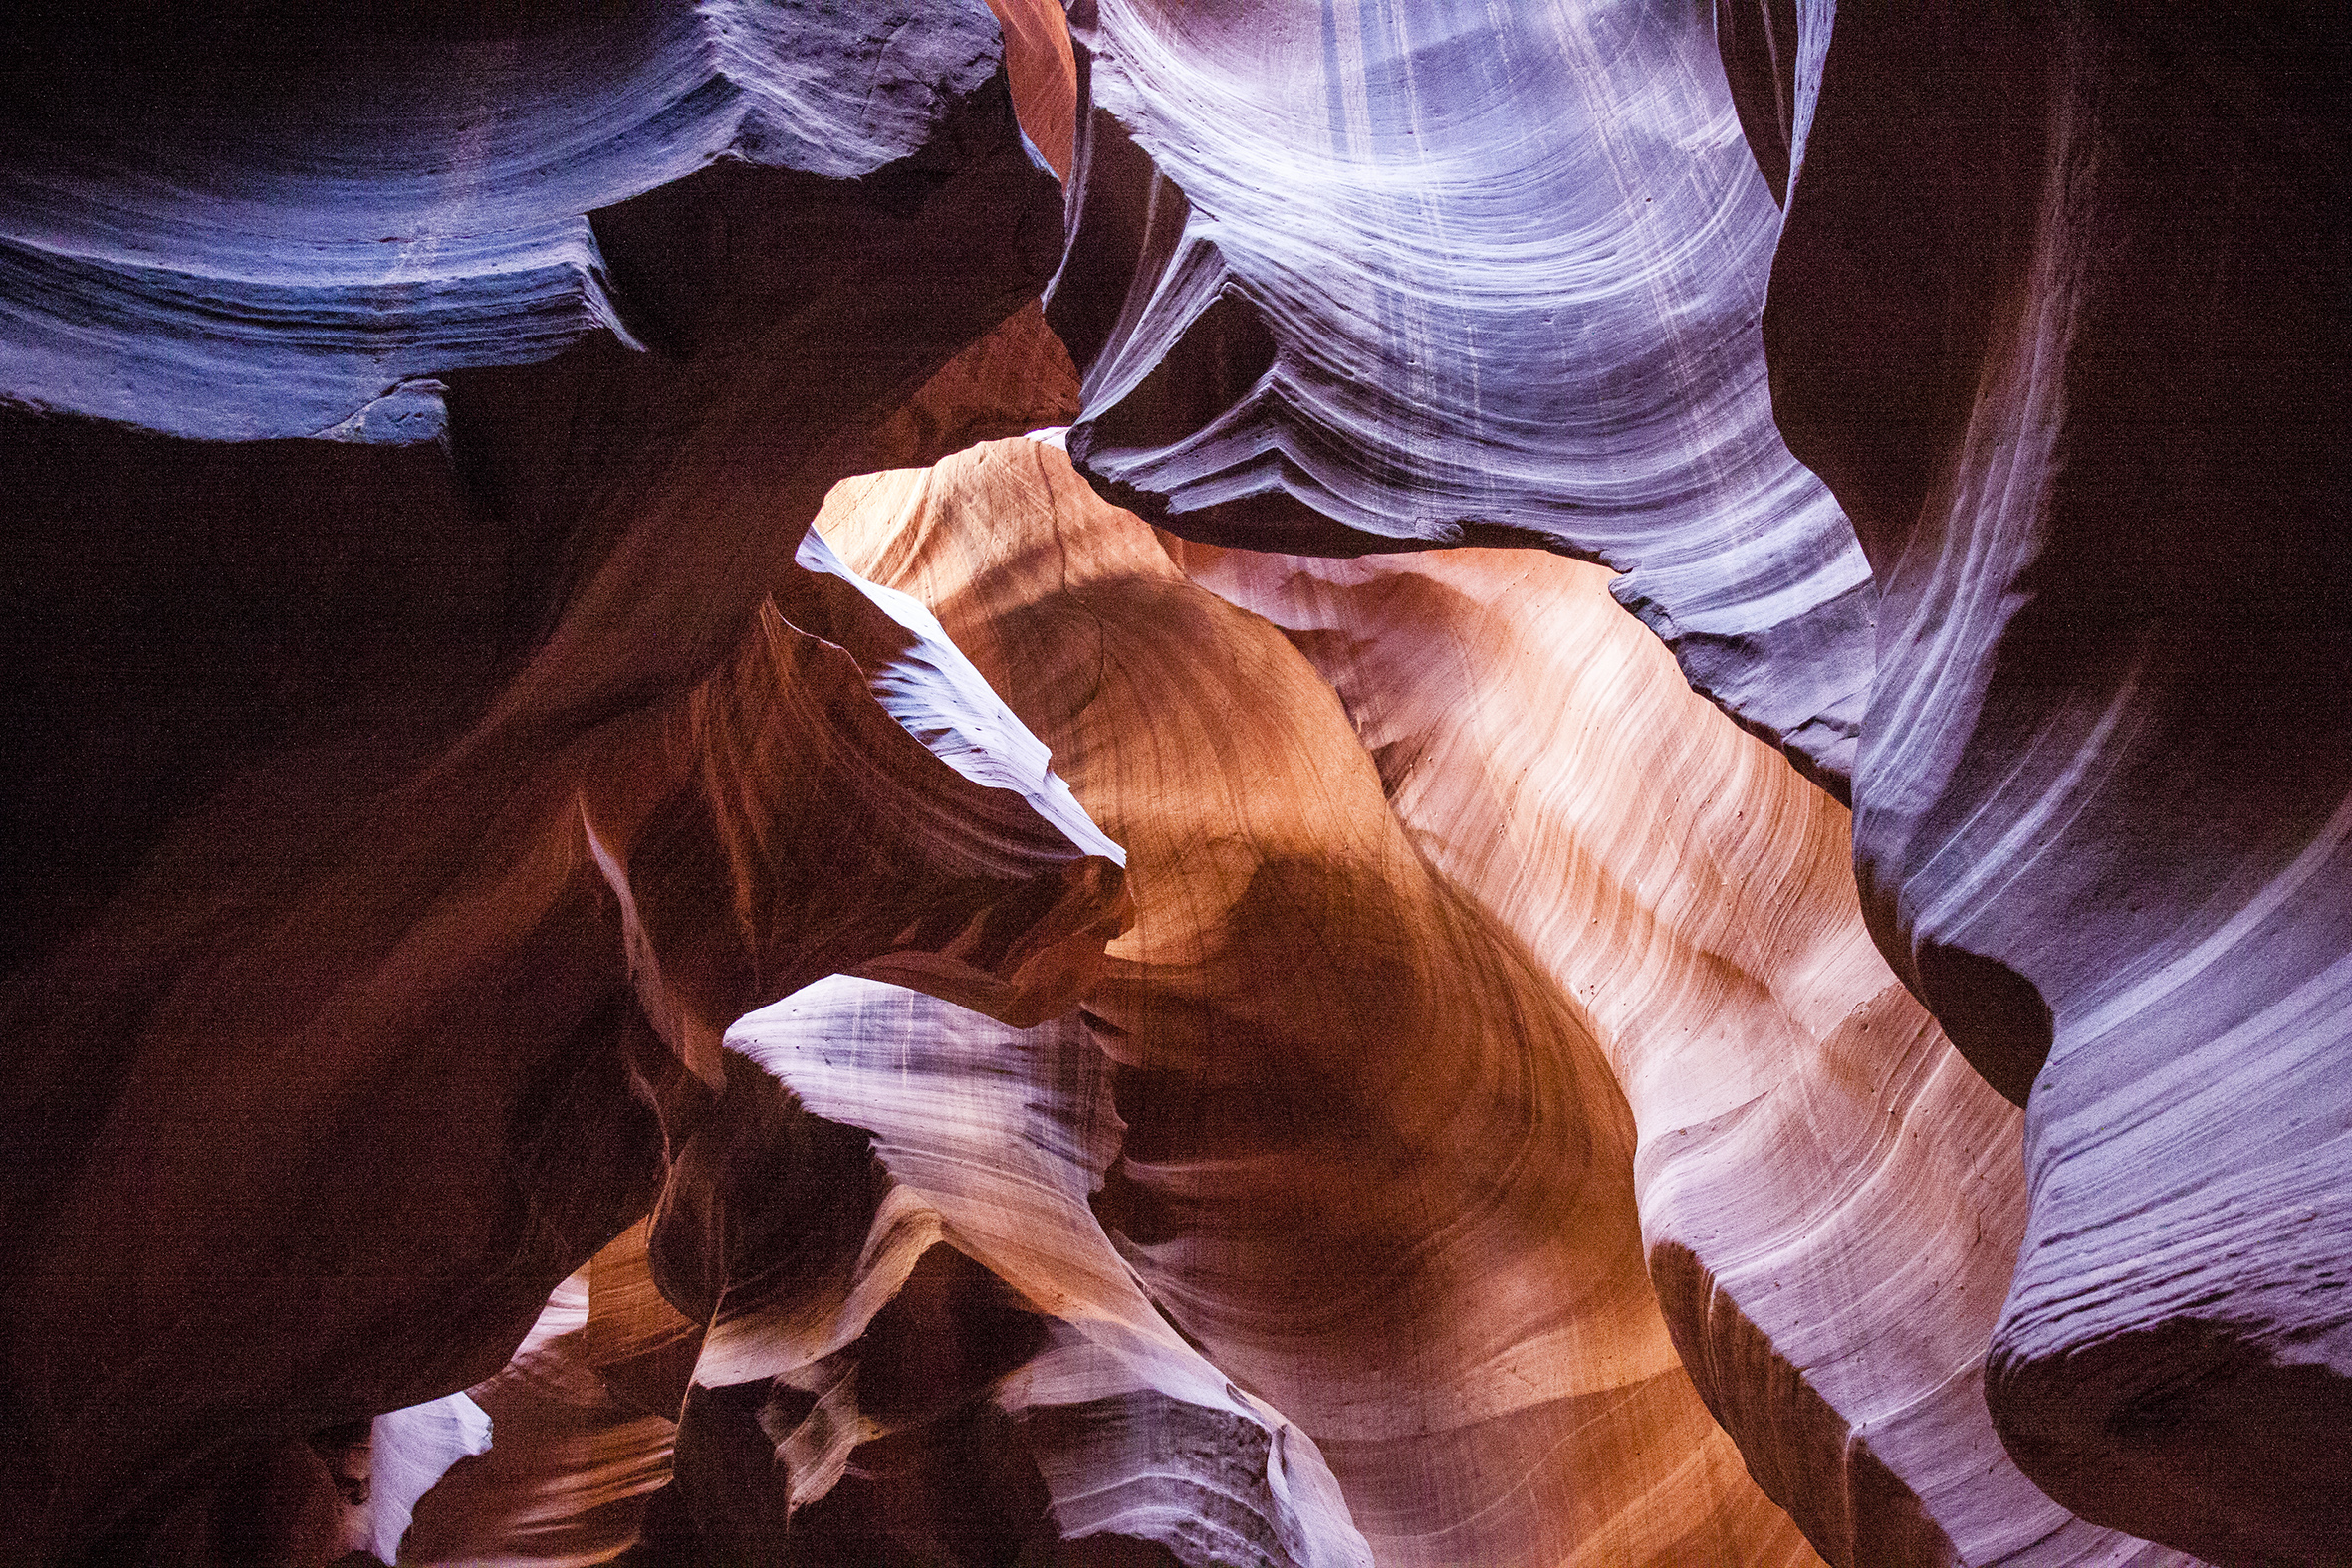 naturaliste-antelope-canyon-reserve-navajo-usa-ouest-2012-marie-colette-becker-05